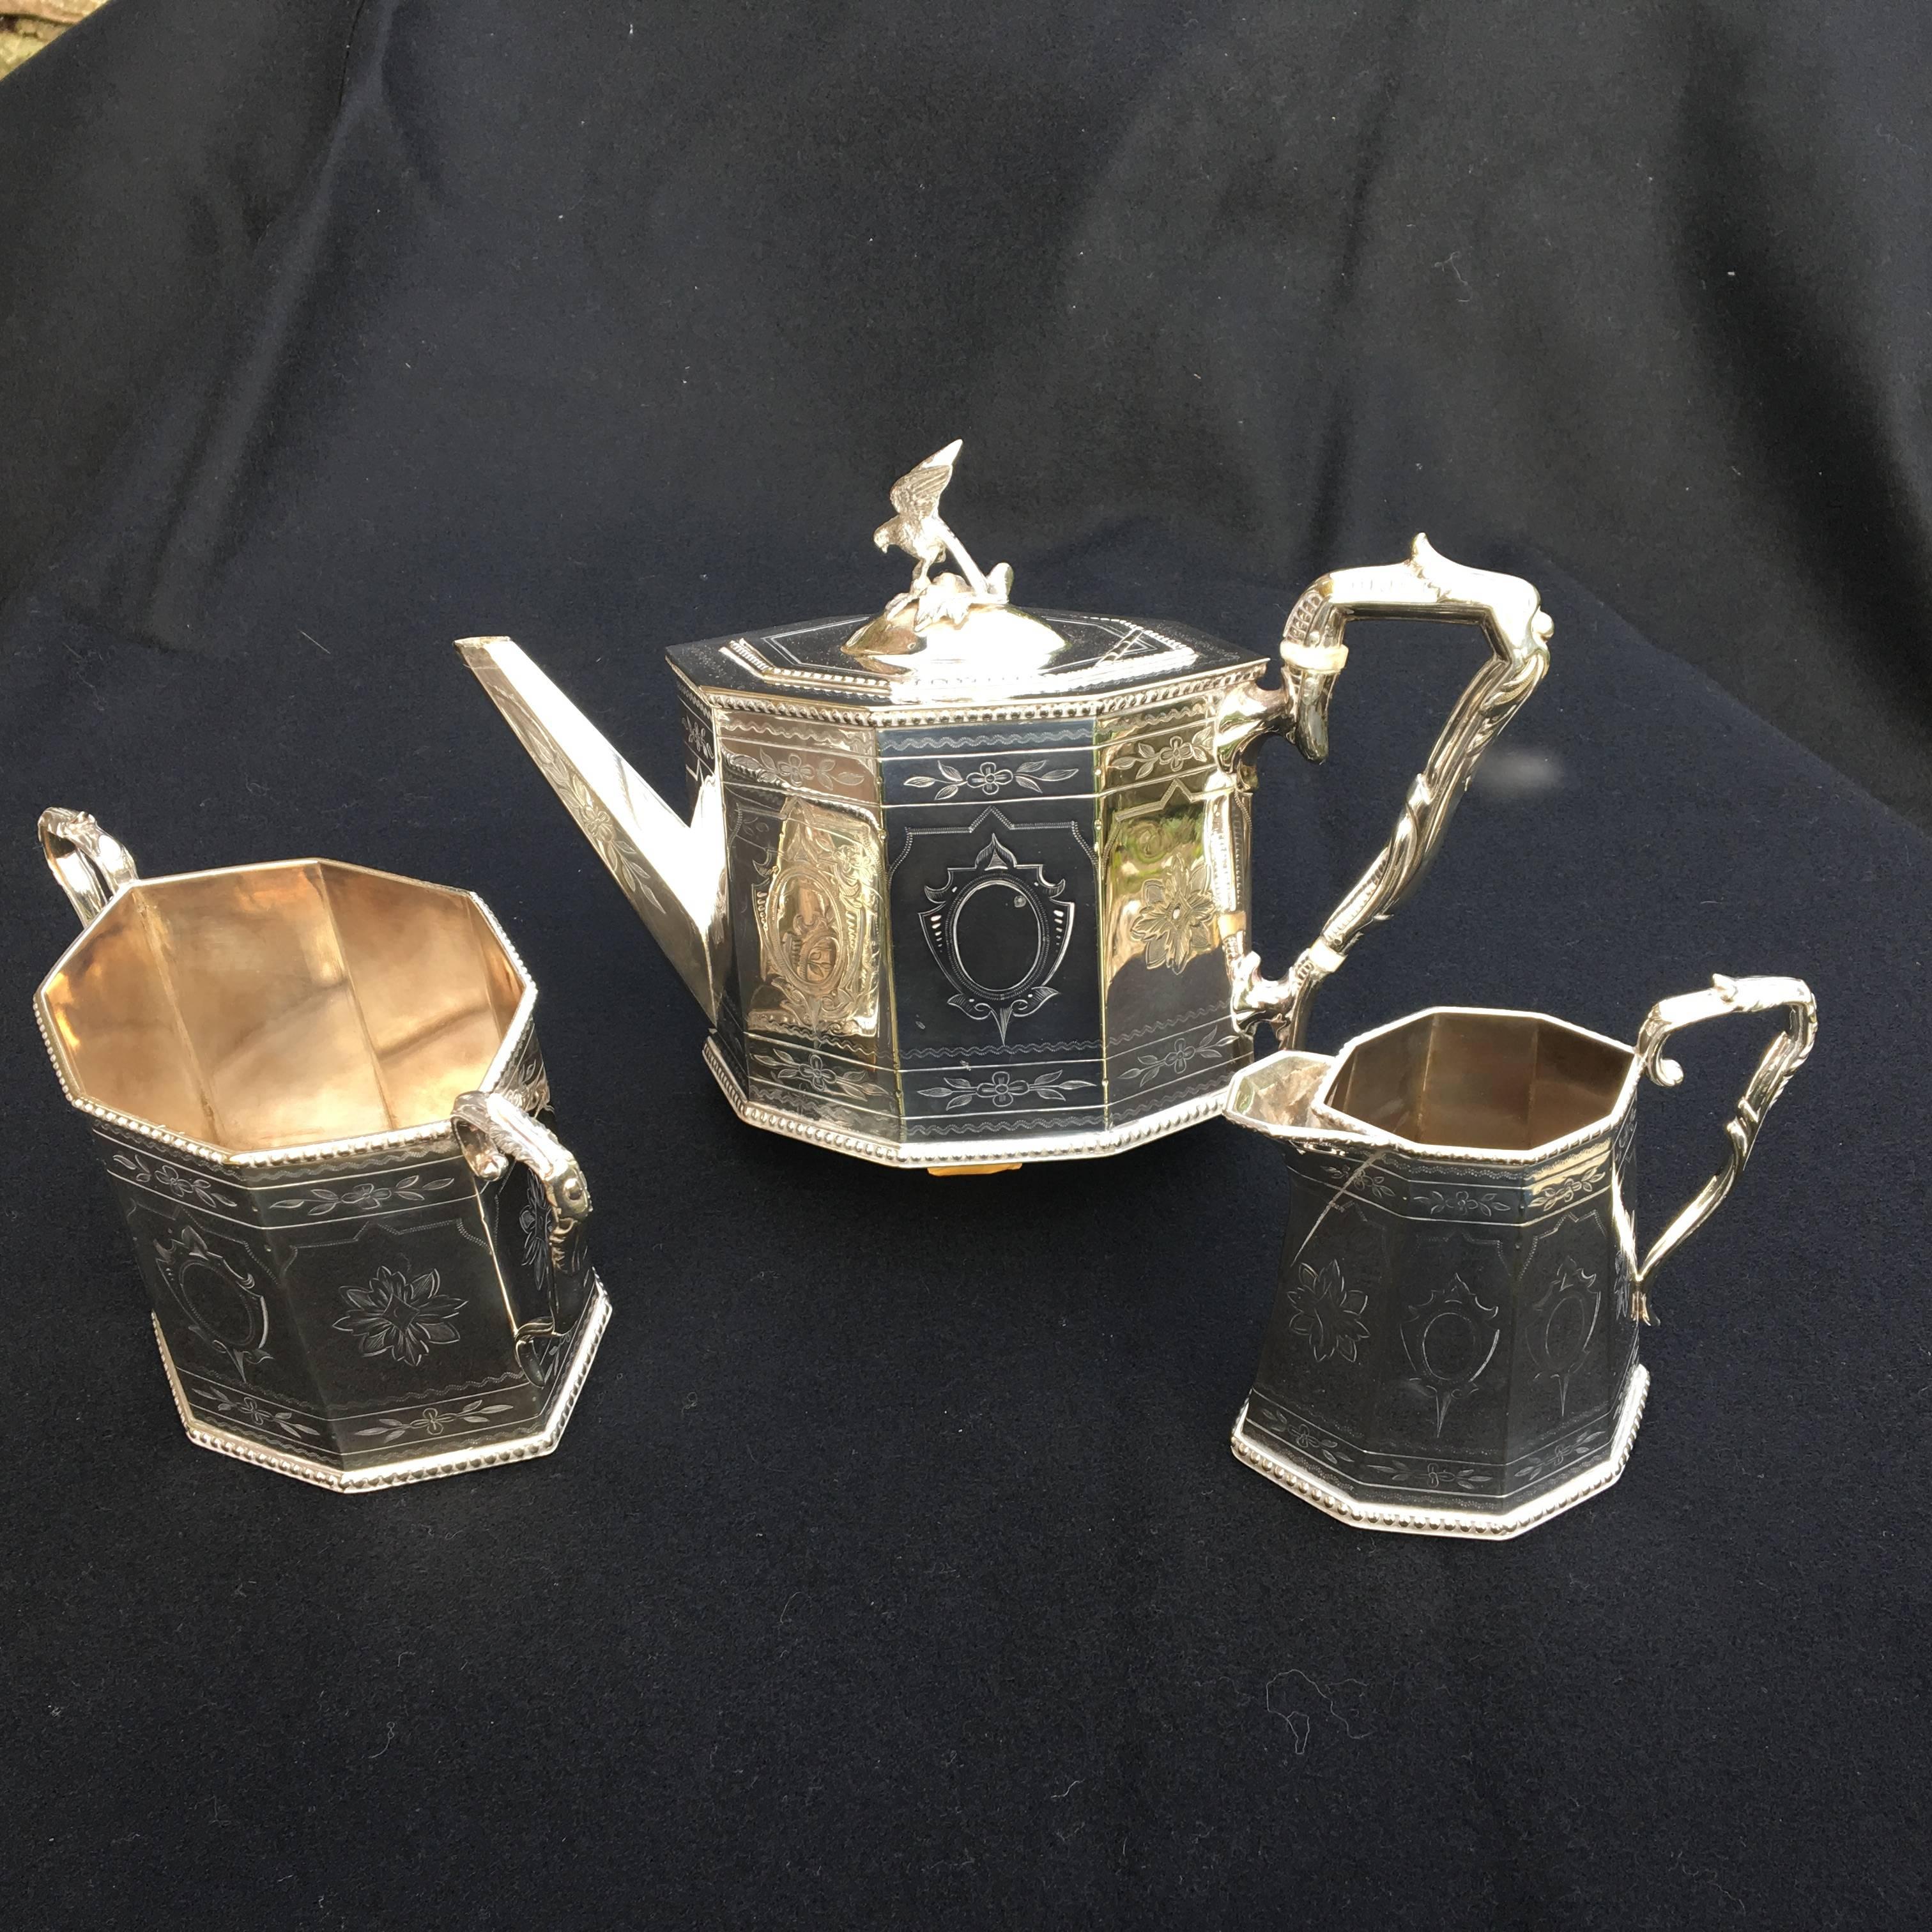 Attractive English silver plated three-piece tea service in excellent condition, circa 1890. Making
tea a special occasion every time. 

A very smart tea service featuring a brightly chased pattern on an octagonal shape with
the teapot handle in